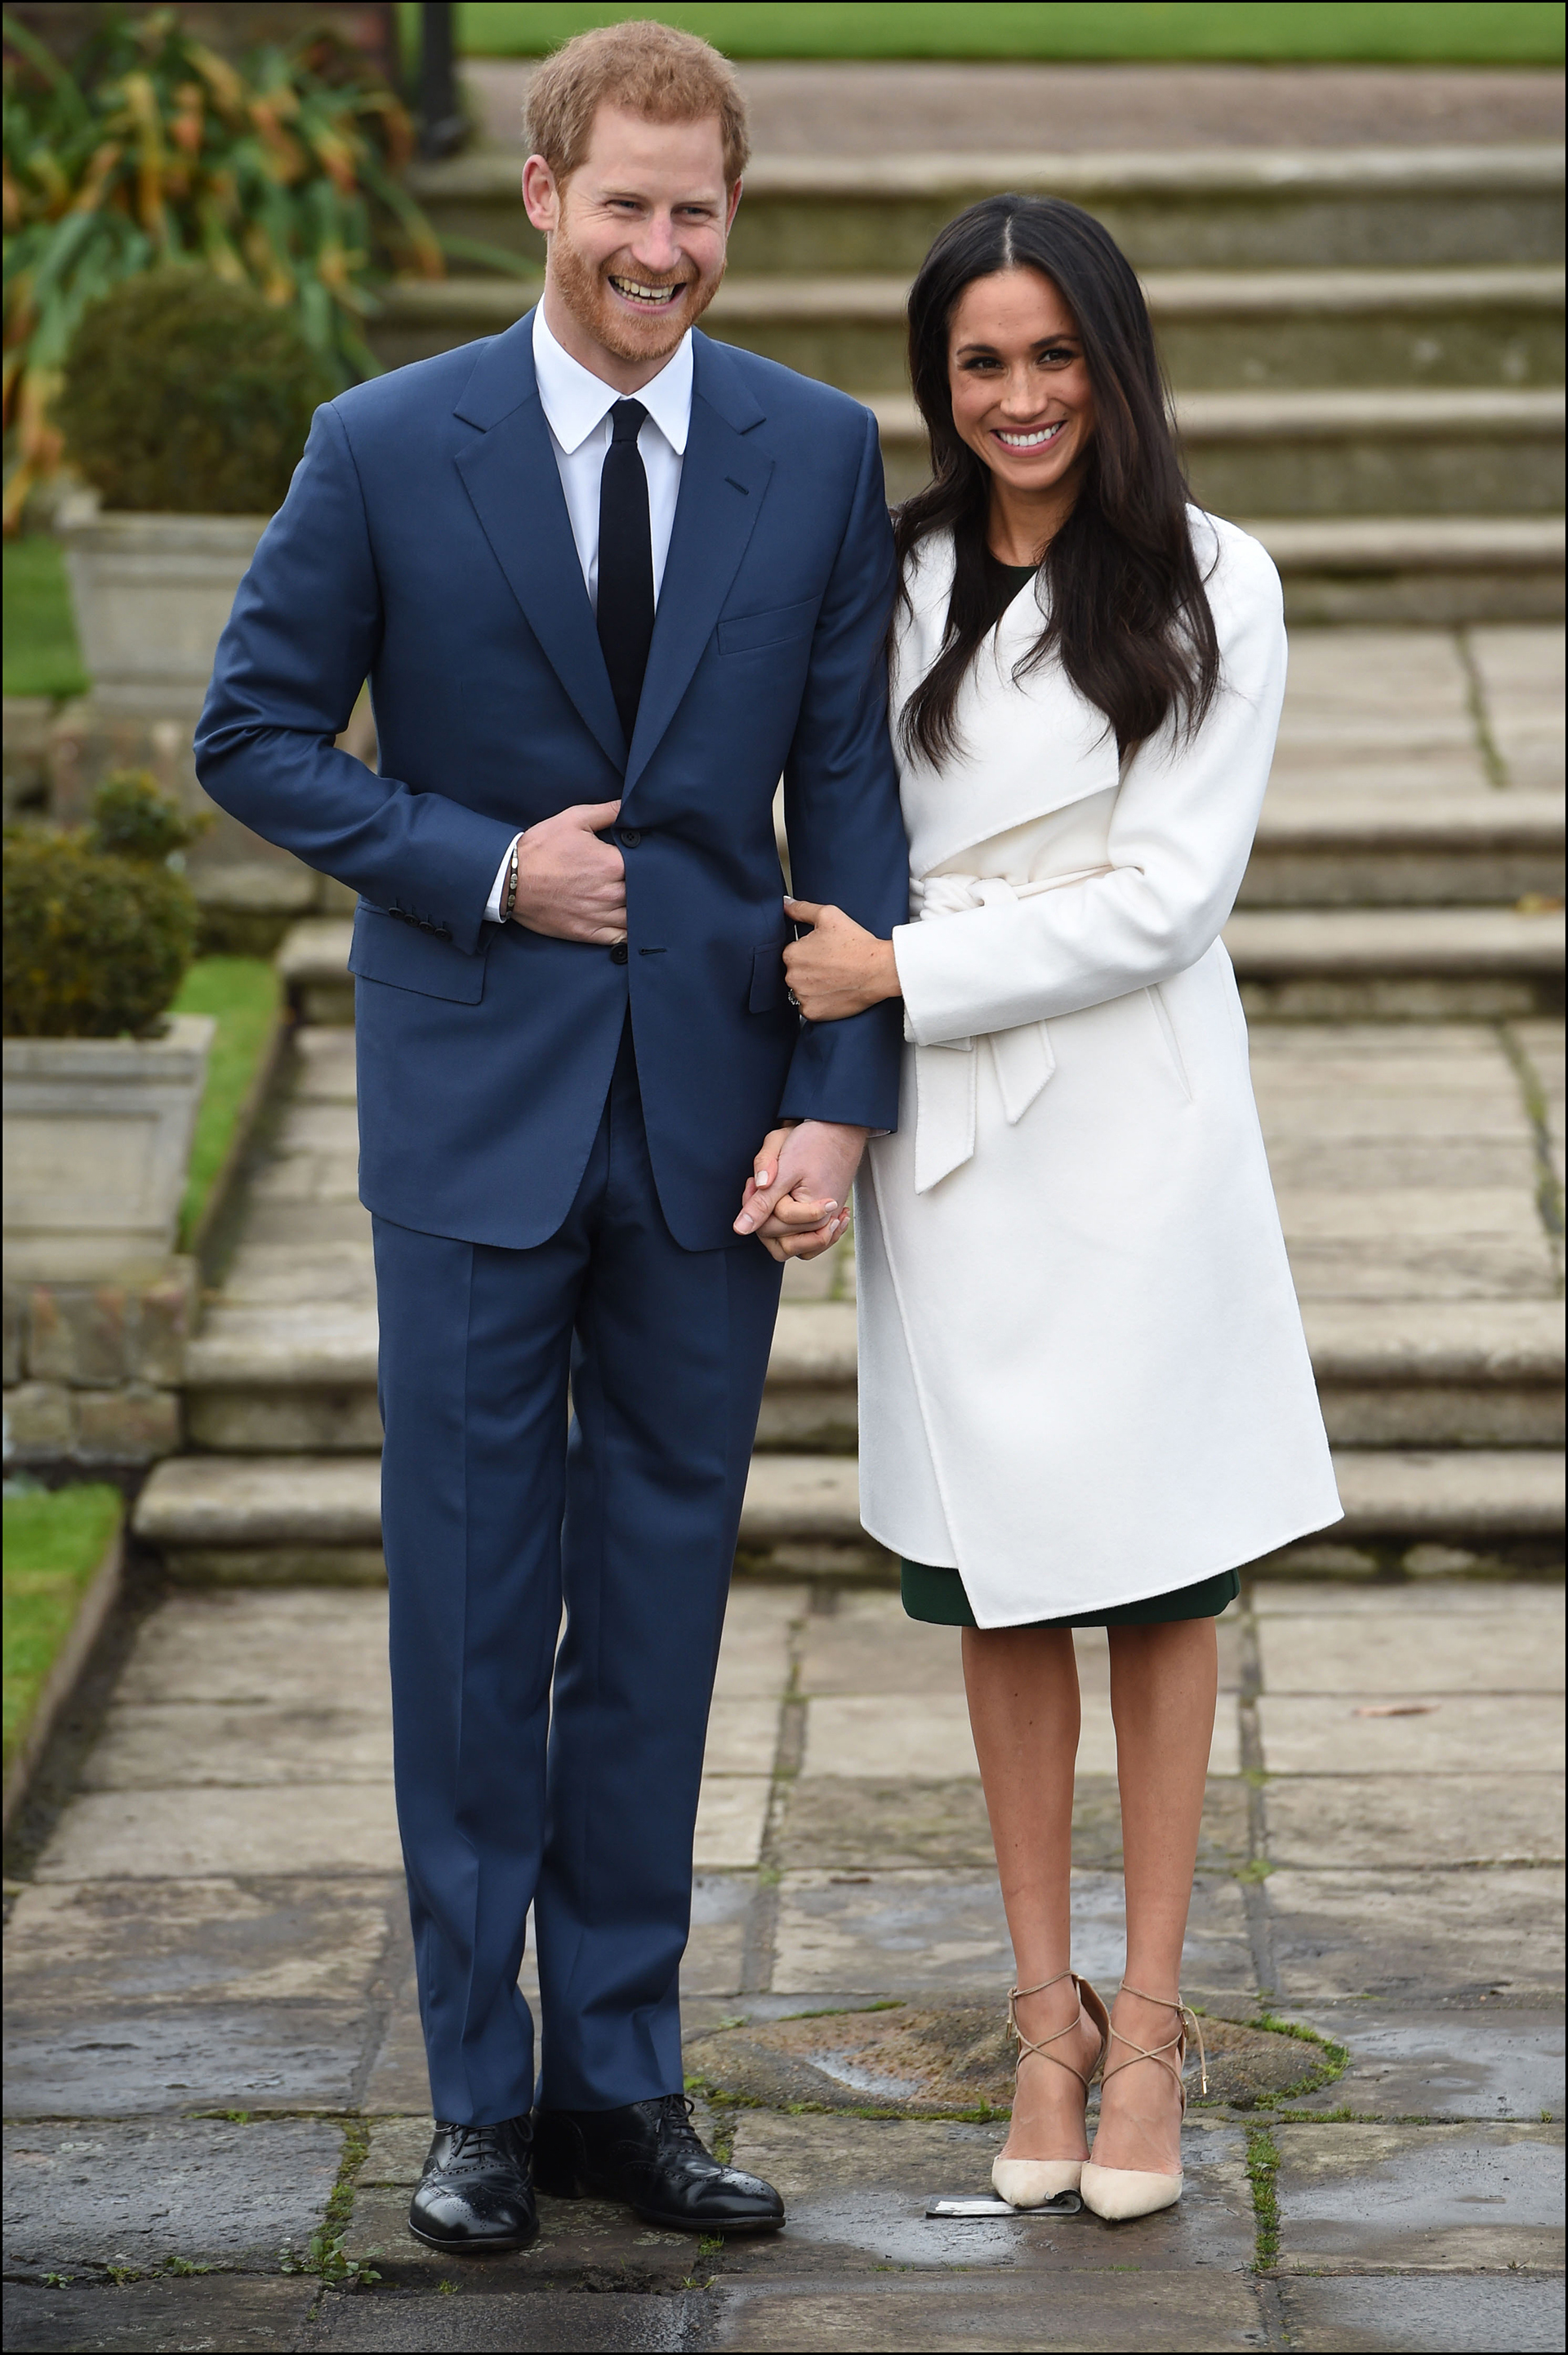 ROYAL Engagement Prince Harry and Meghan Markle. 27/11/2017.